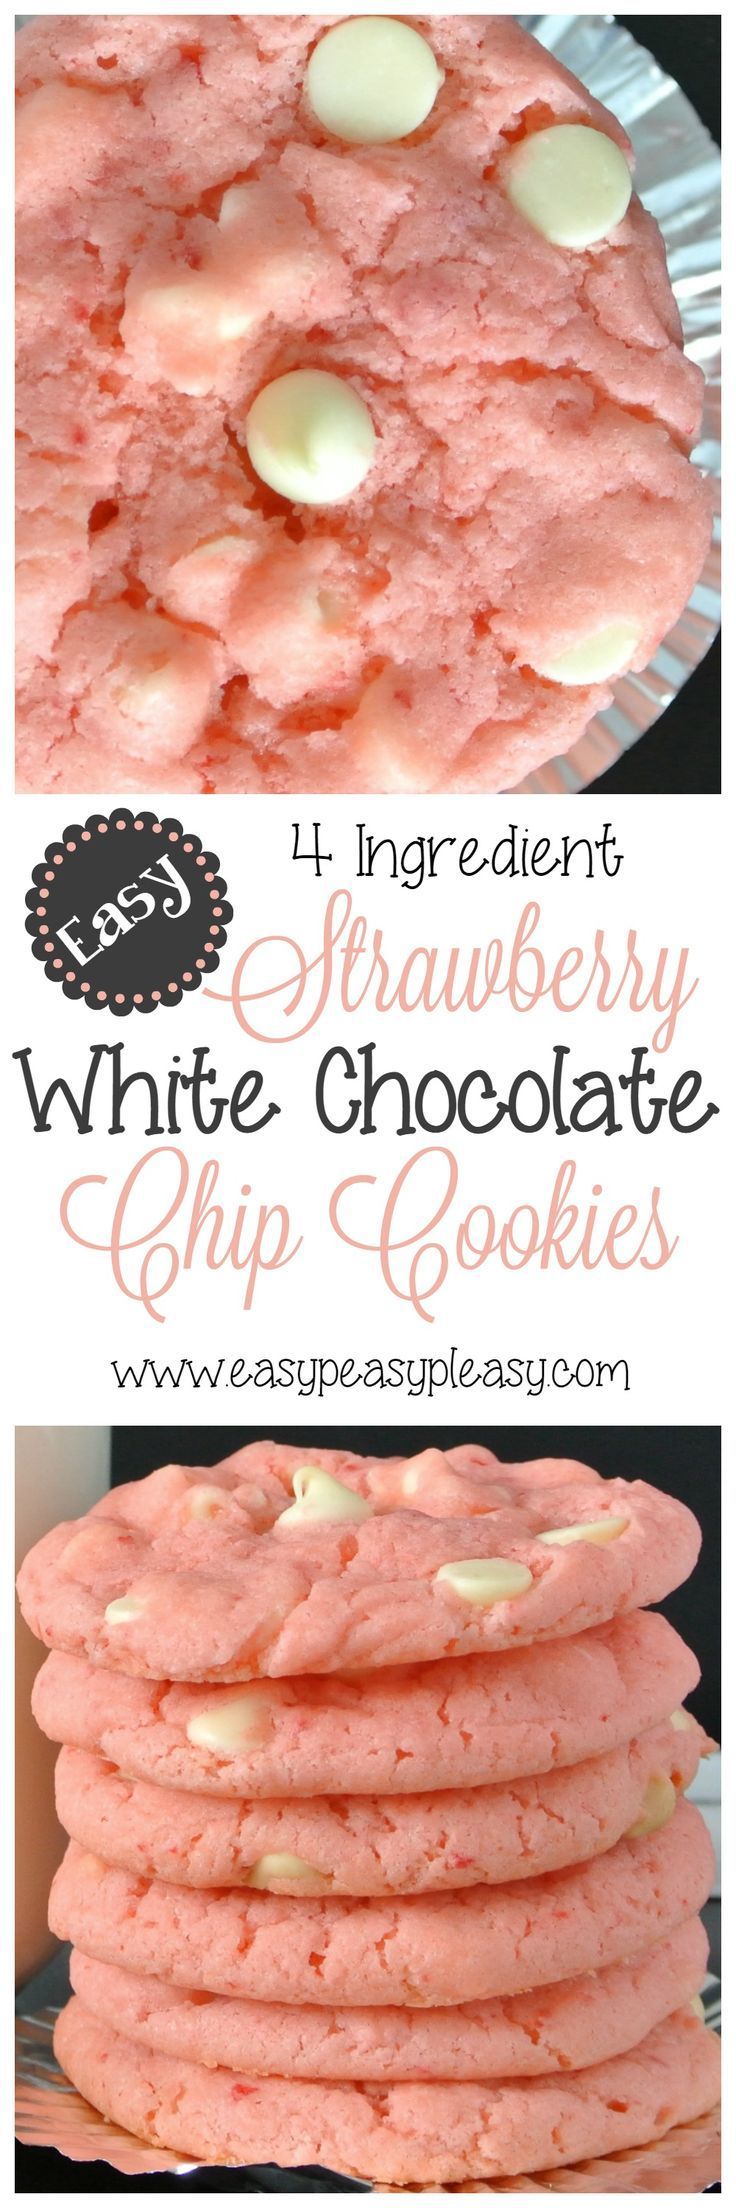 Do you want to see how easy these Strawberry White Chocolate Chip Cookies really a